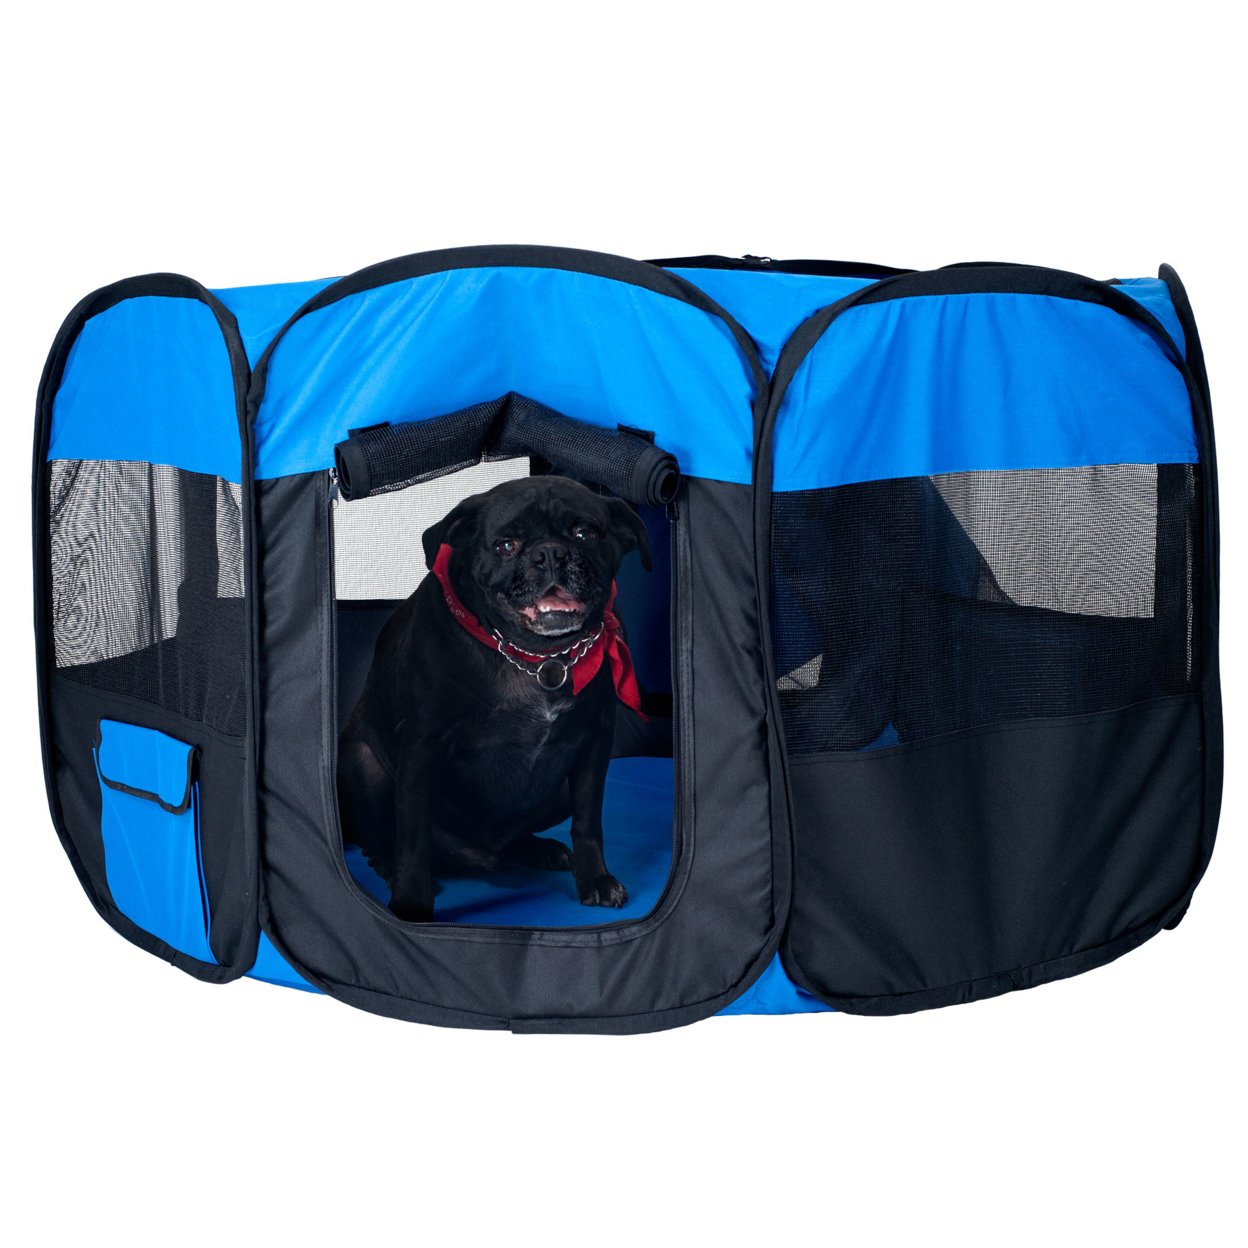 PETMAKER Pop-Up Pet Playpen With Canvas Carry Bag 24 Inches Tall 42 Inch Diameter